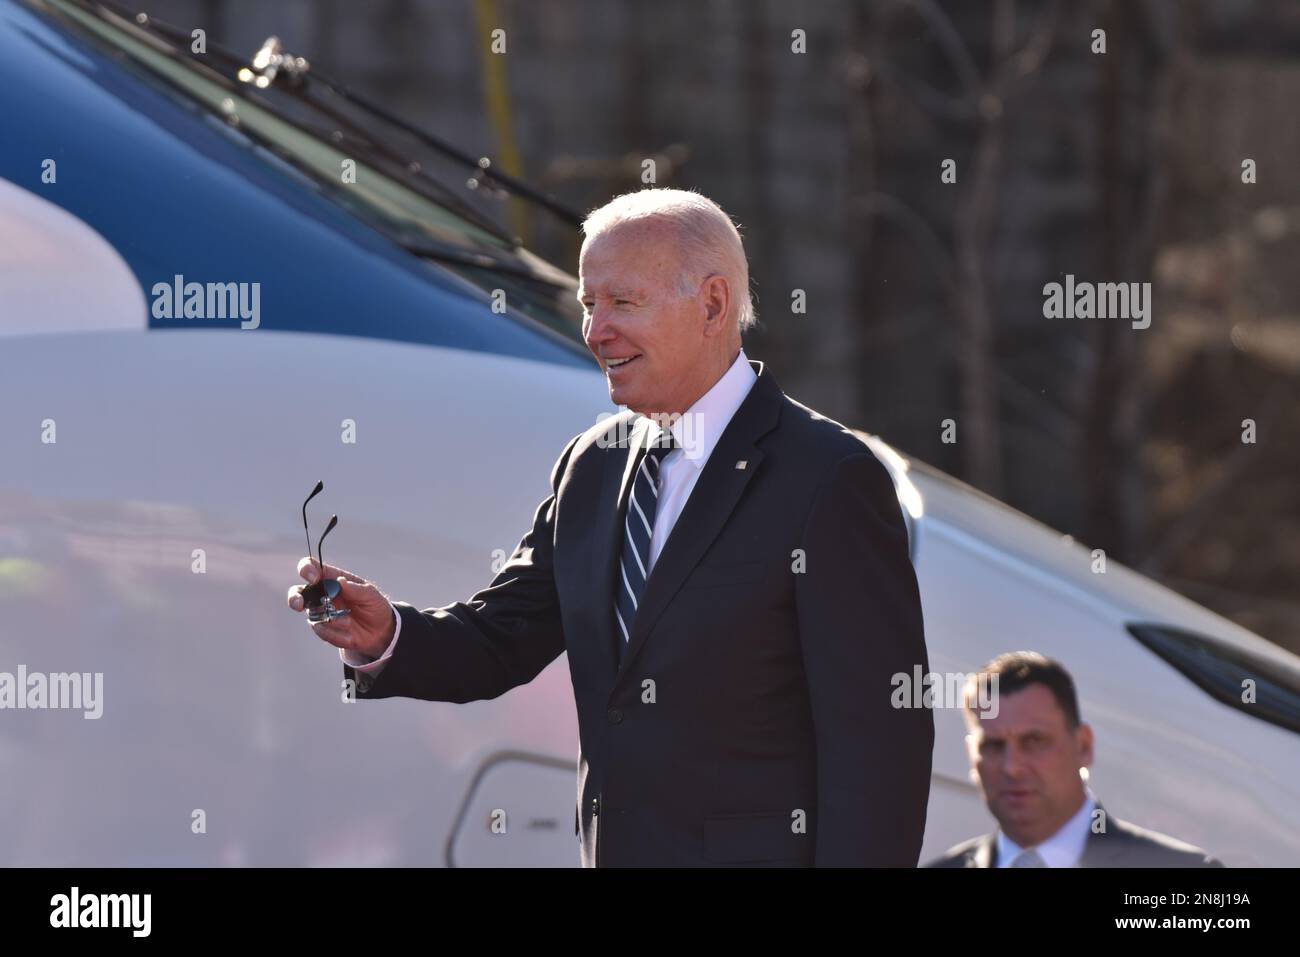 Baltimore, United States of America. 30 January, 2023. U.S President Joe Biden arrives to deliver remarks during an event announcing the replacement of the 150-year-old Baltimore and Potomac Tunnel at the Falls Road Amtrak maintenance building, January 30, 2023 in Baltimore, Maryland.  Credit: Patrick Siebert/MDGovpics/Alamy Live News Stock Photo